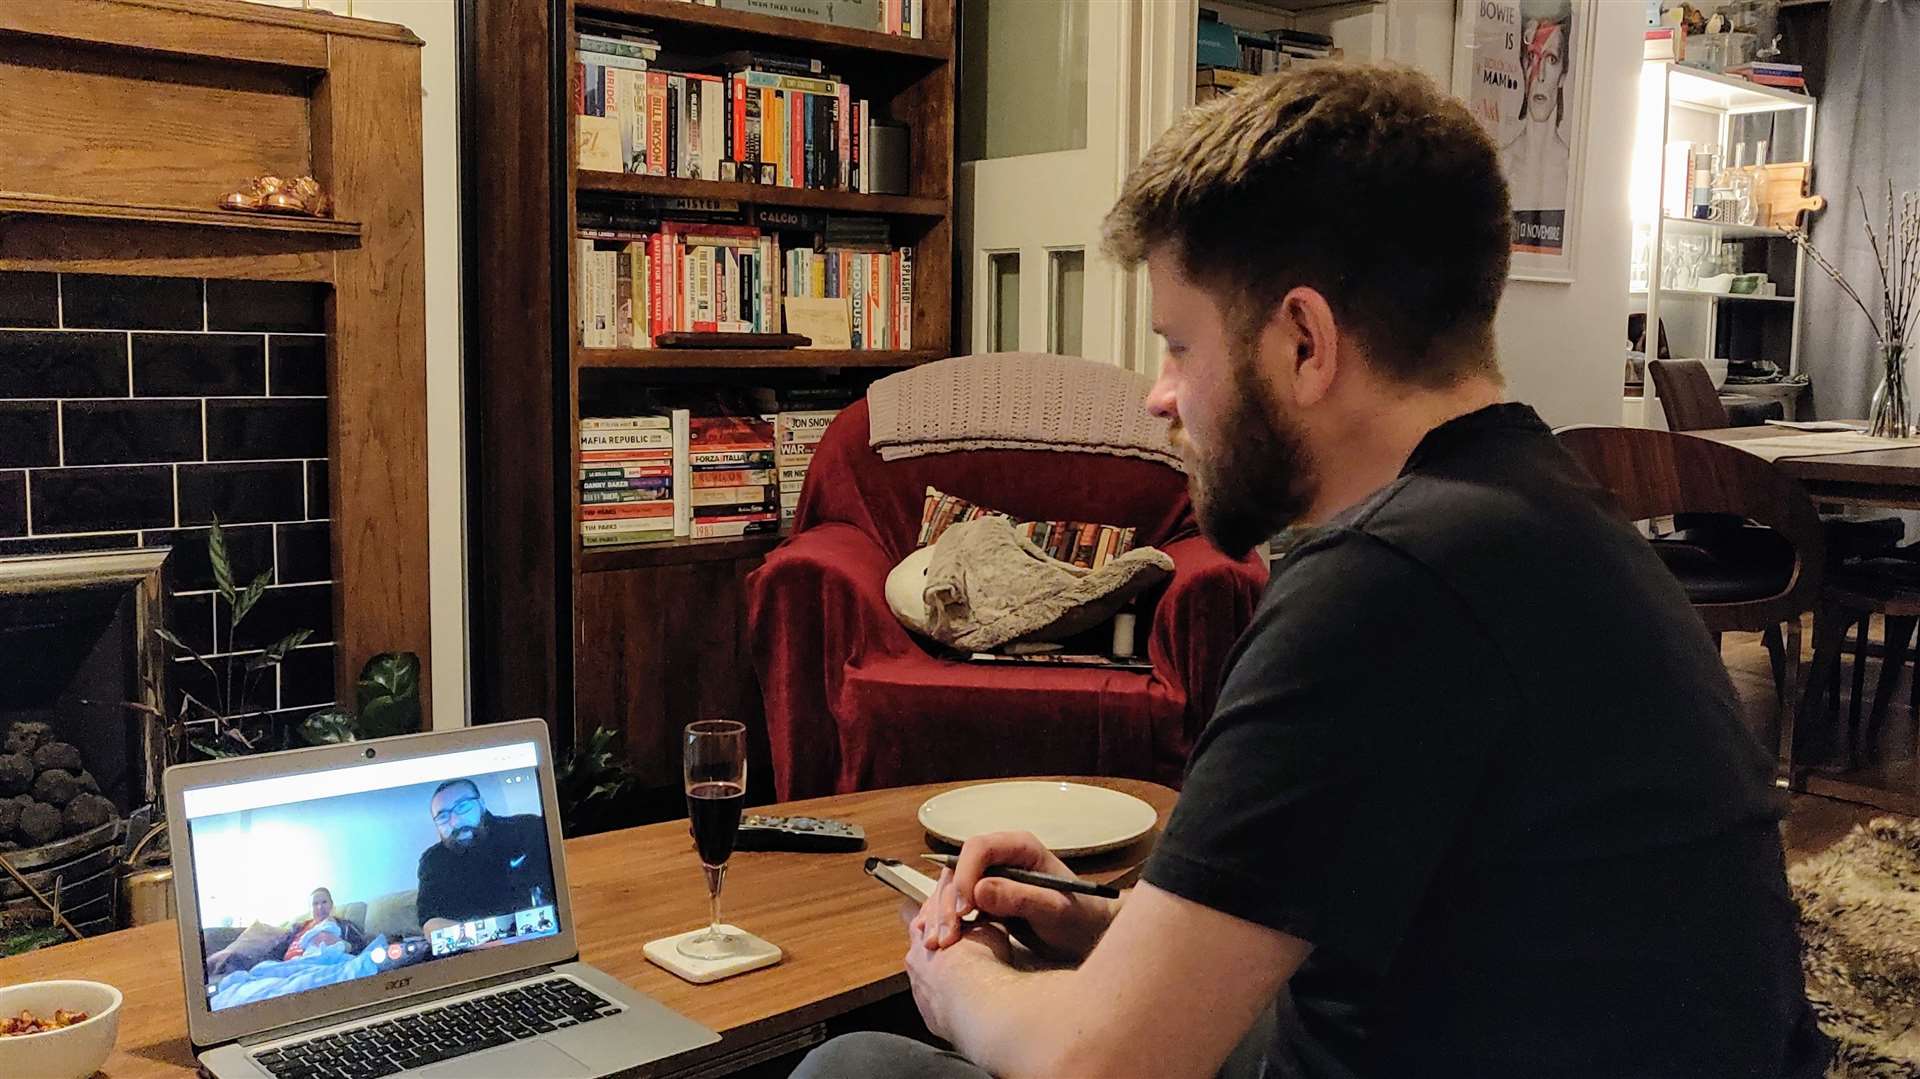 We kicked things off with some pictures of Kent Online staff at home. Here's reporter Rhys Griffiths taking part in a virtual pub quiz with friends